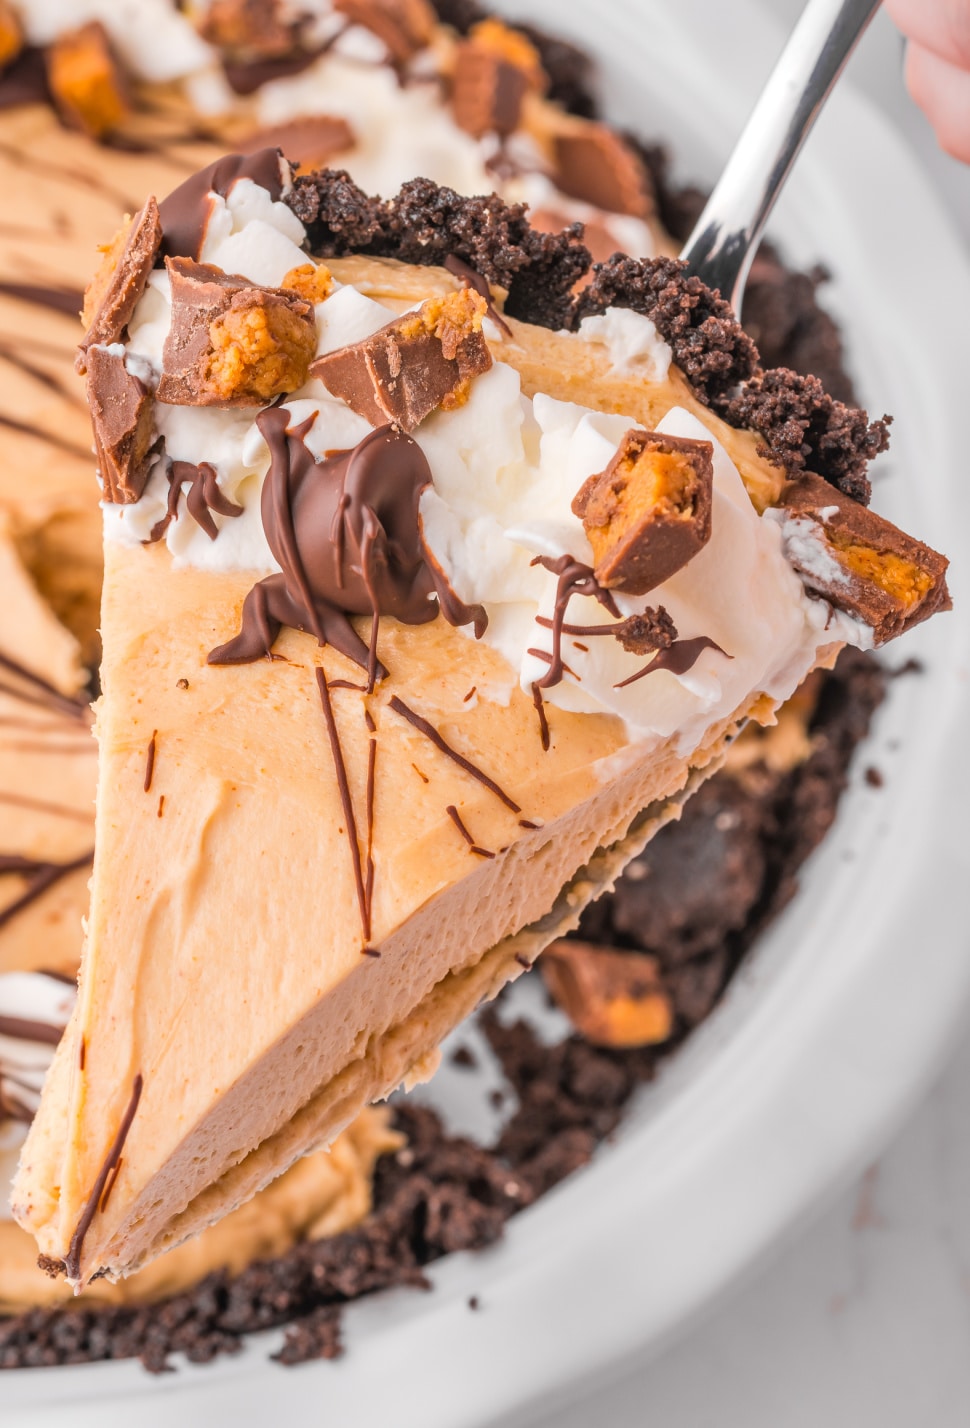 A single piece o pie on a pie server with chopped garnished peanut butter cups.